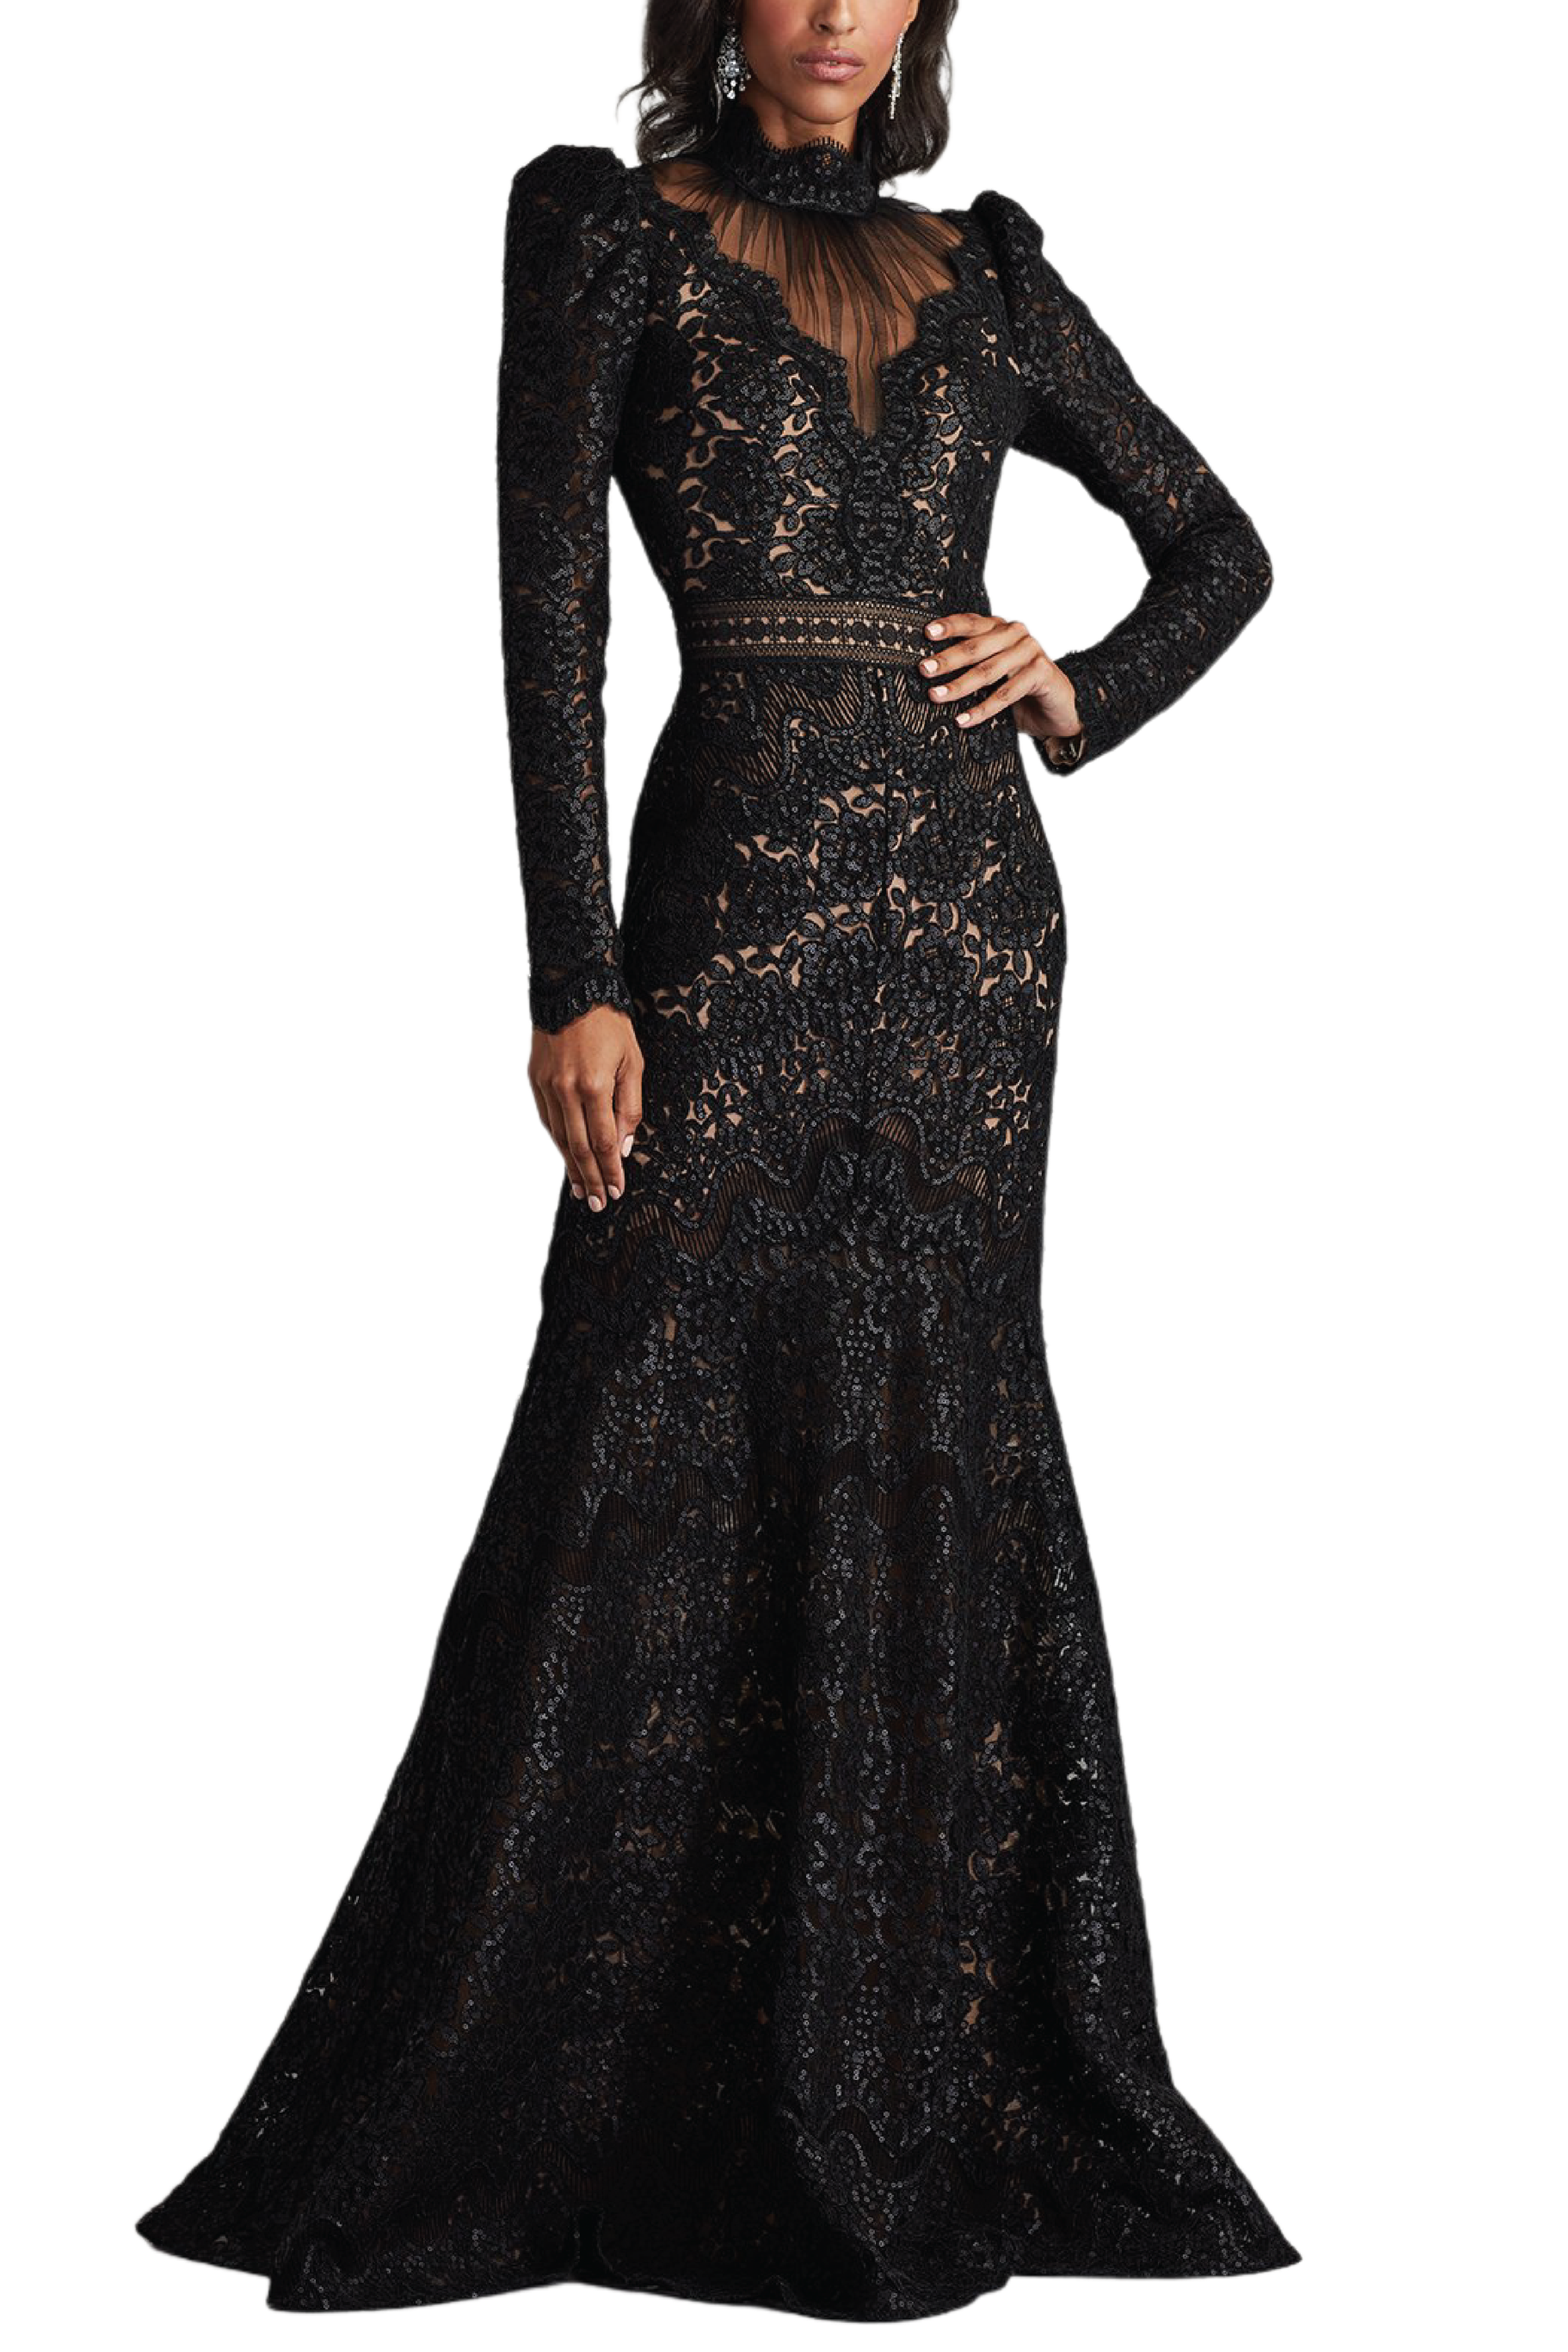 Enzo Sequin Embroidered High Neck Illusion Gown